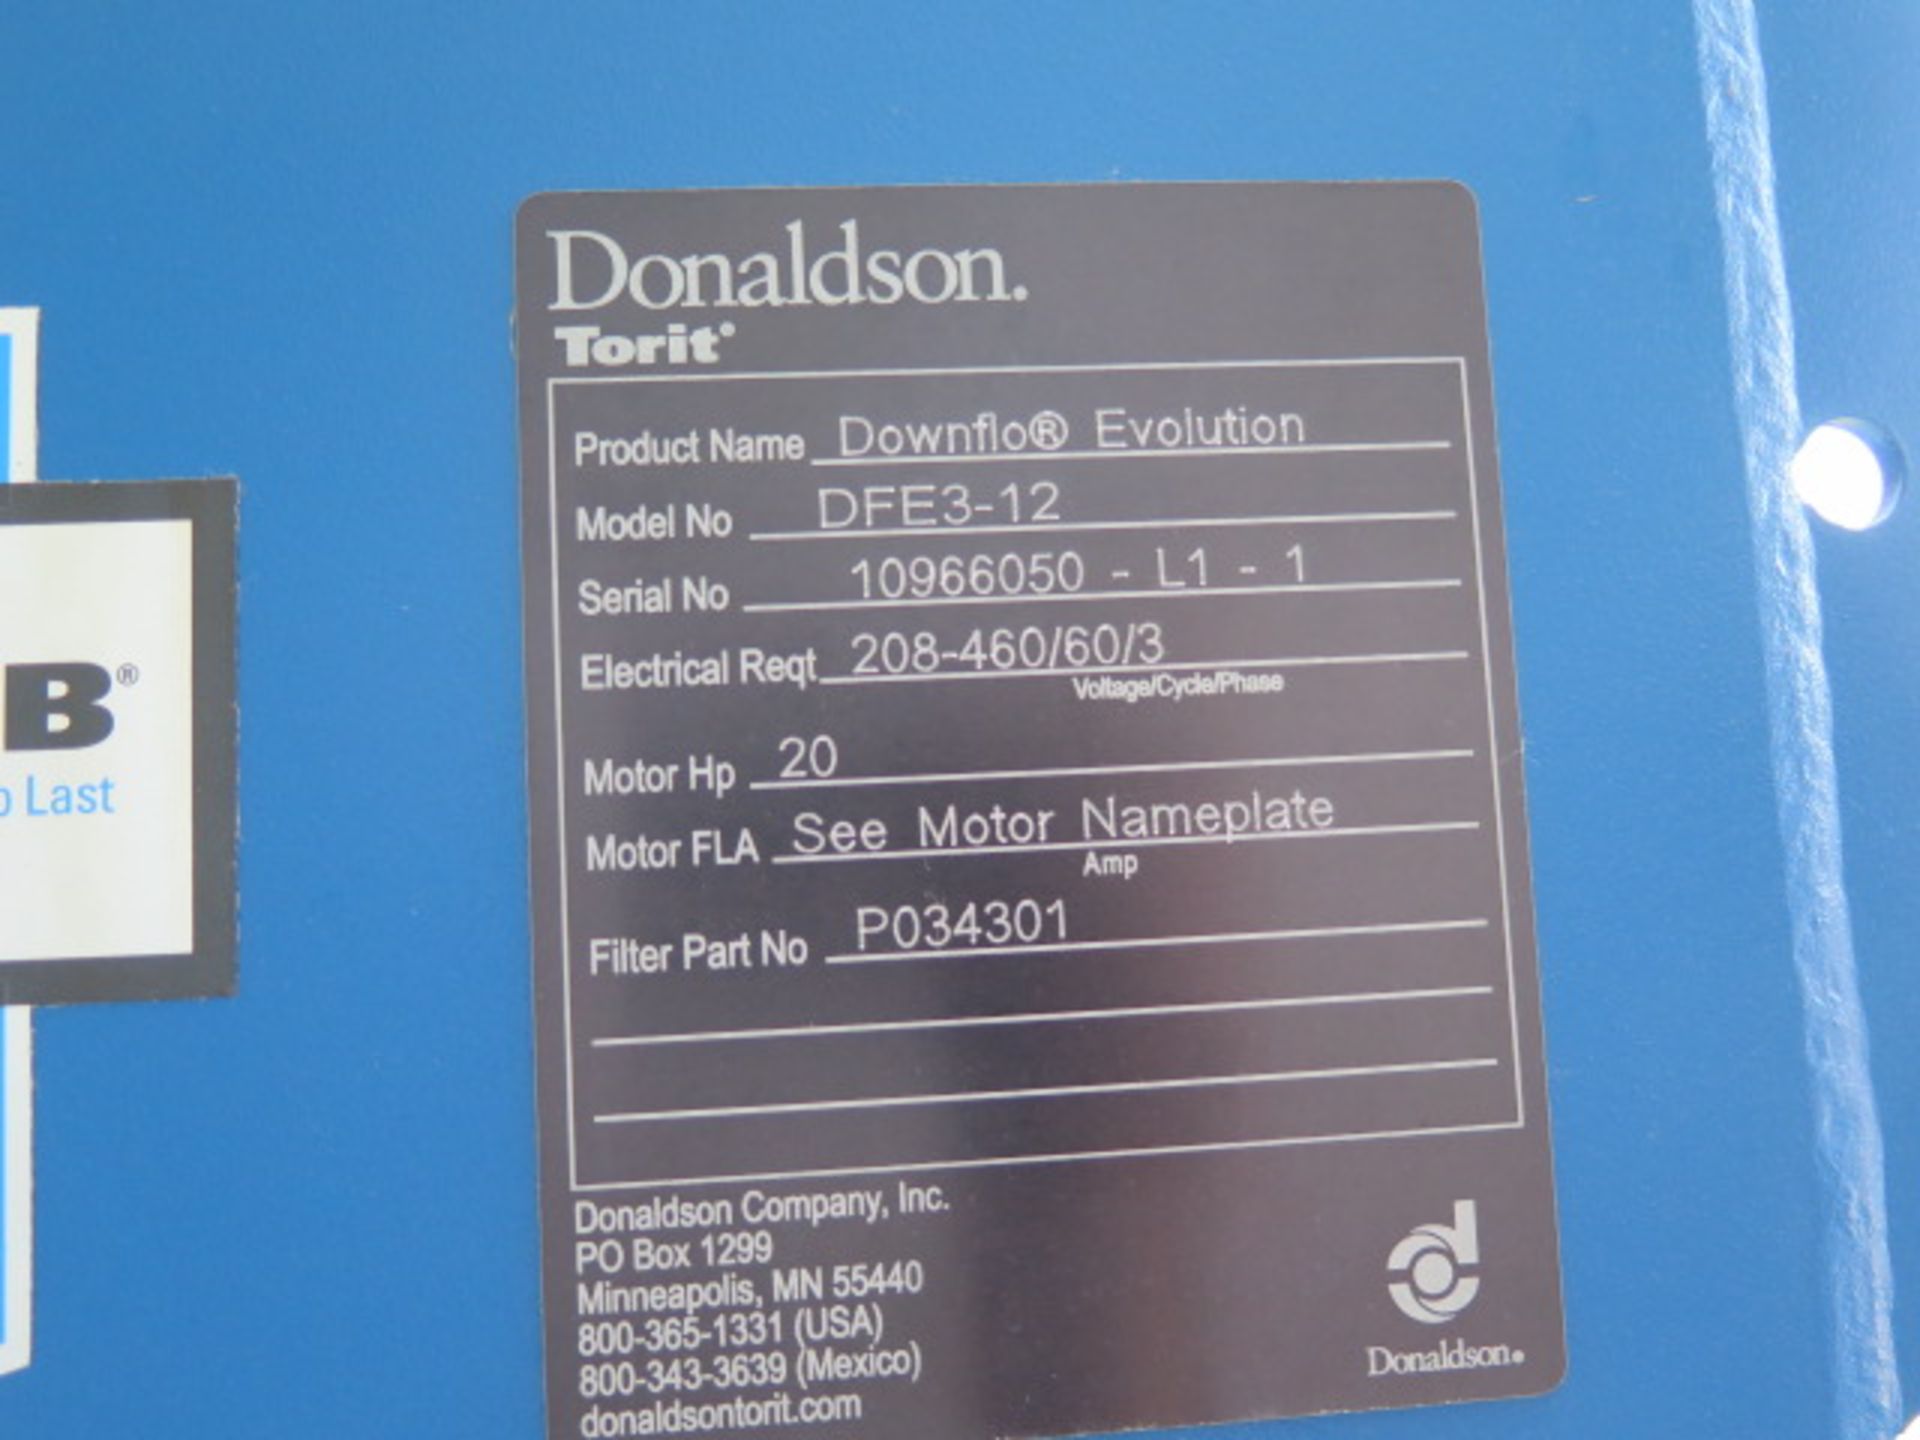 Donaldson Torit Downflo Evolution DFE3-12 Dust Collection System s/n 10966050-L1-1 w/ Donaldson - Image 6 of 8